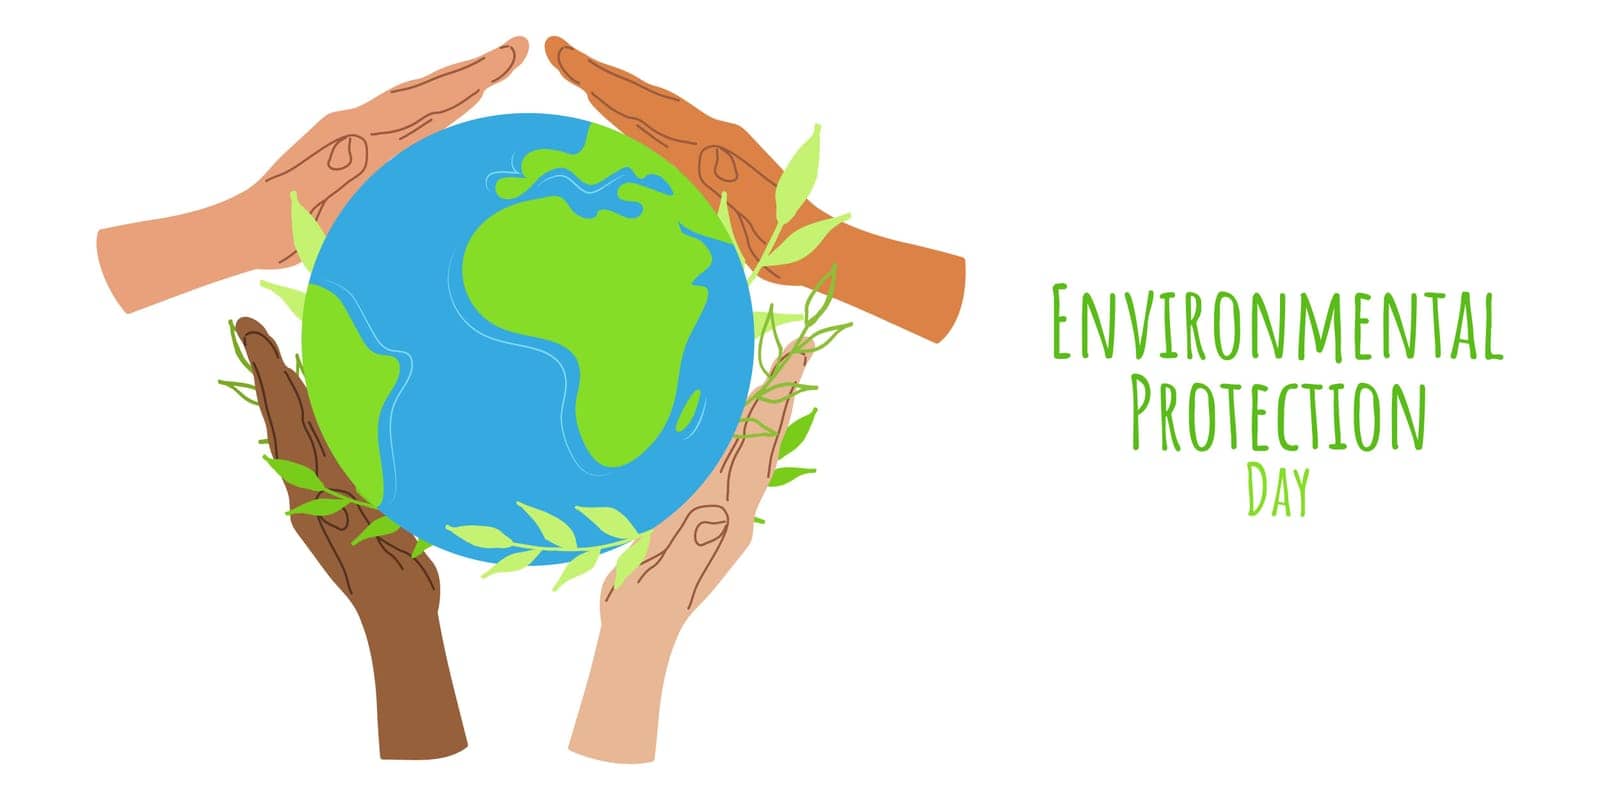 Environmental Protection Day Save the Planet Earth by Veranikas